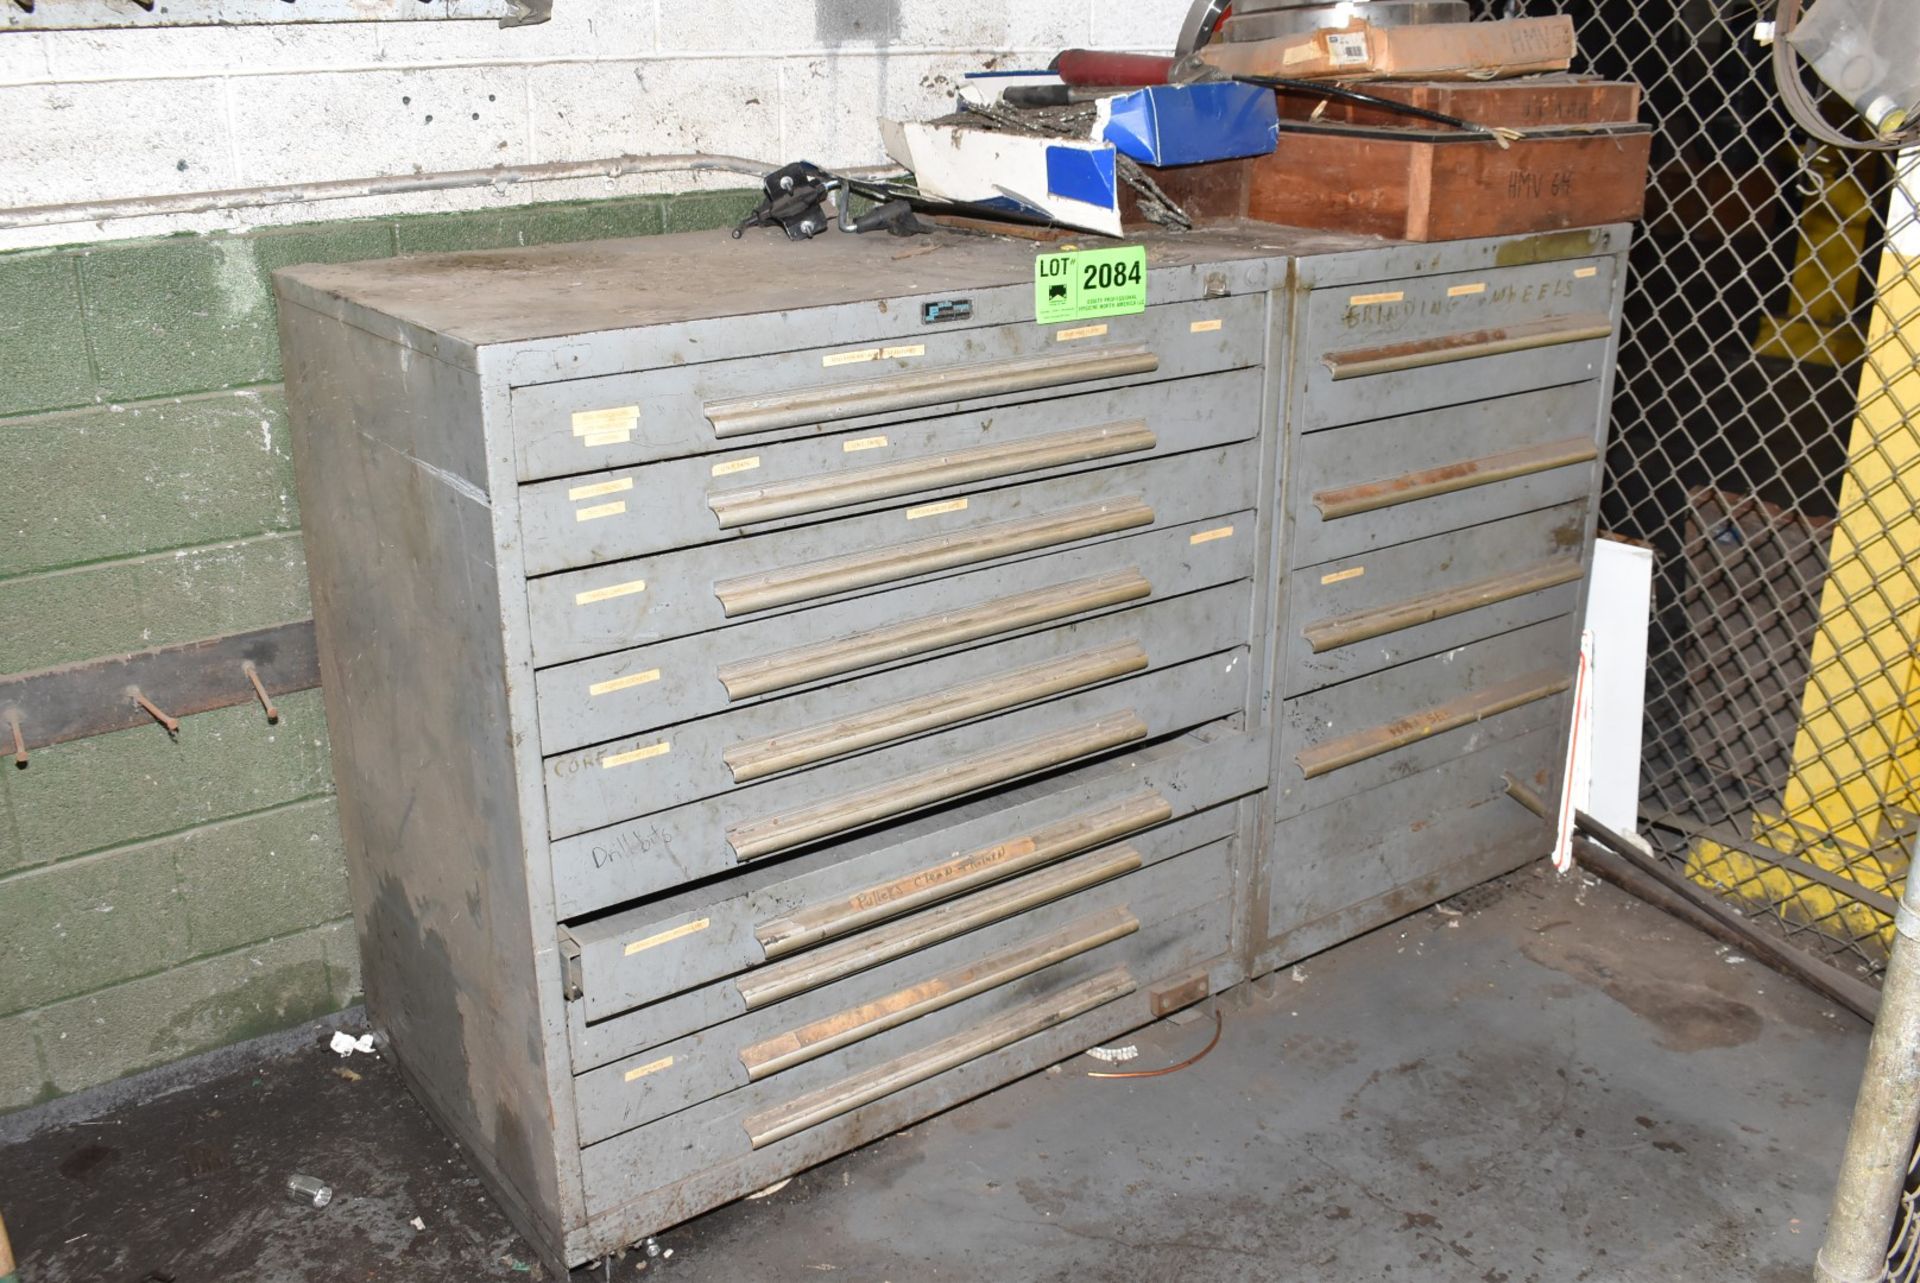 LOT/ (1) 10 DRAWER TOOL CABINET AND (1) 4 DRAWER TOOL CABINET [RIGGING FEES FOR LOT #2084 - $200 USD